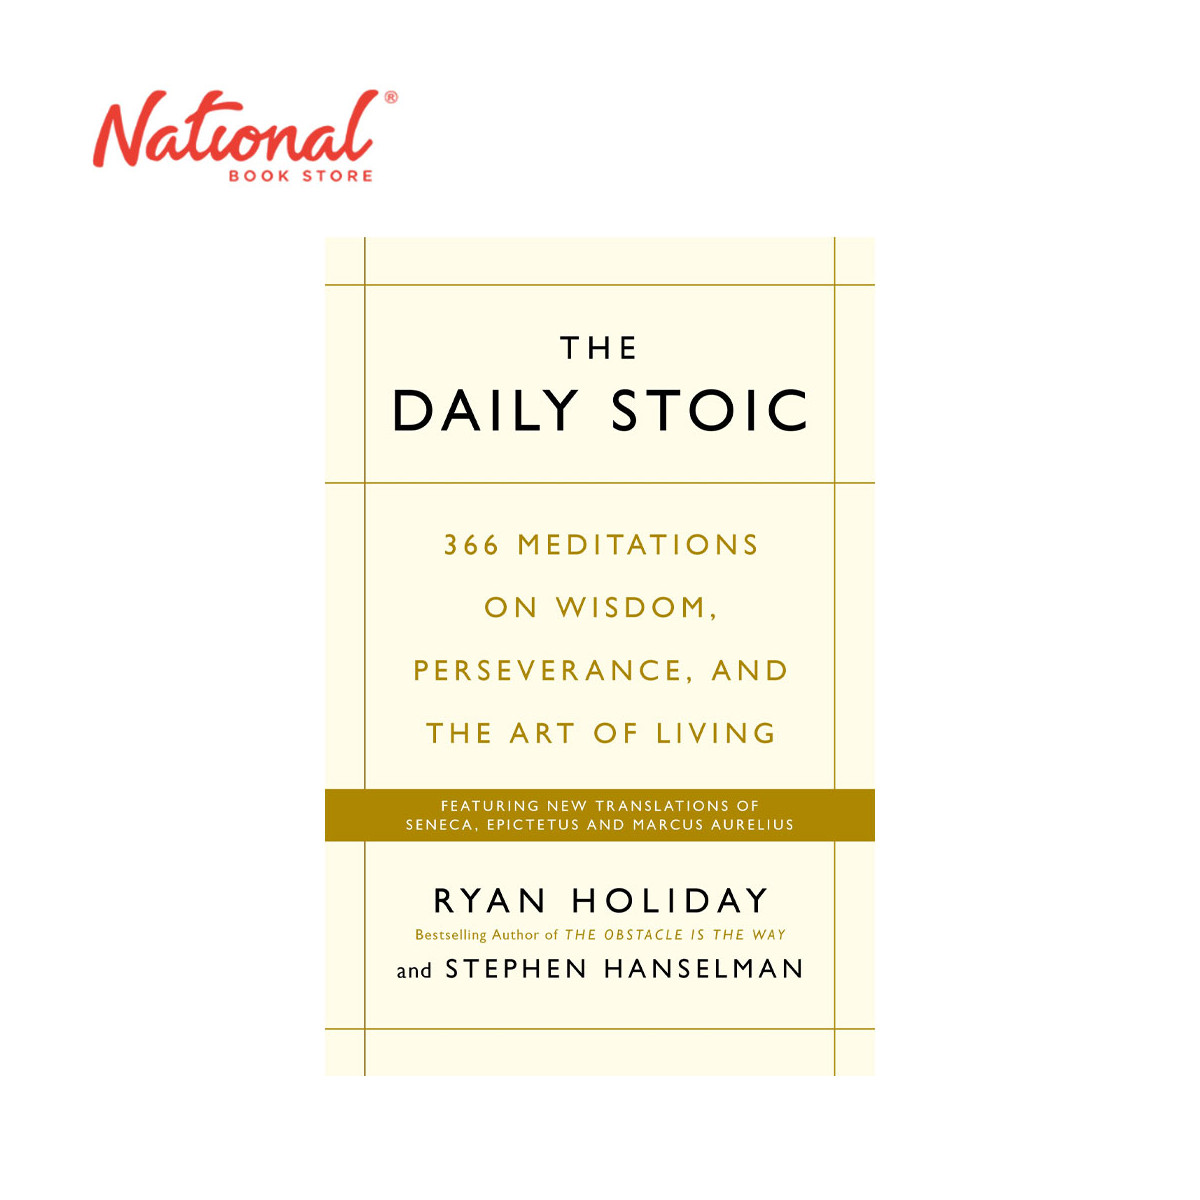 The Daily Stoic by Ryan Holiday and Stephen Hanselman - Trade Paperback - Self-Help